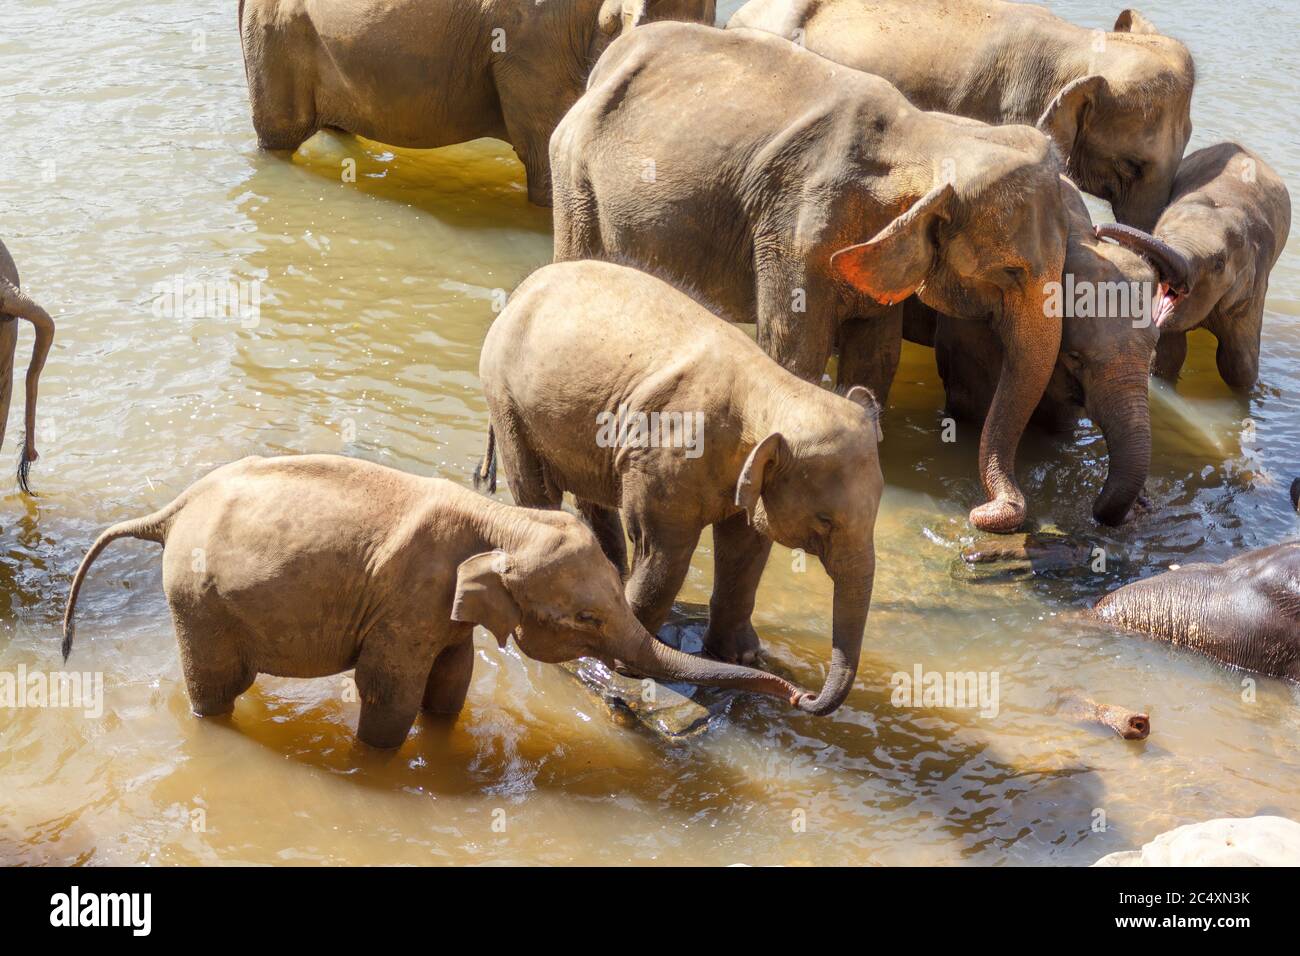 Large group of elephants having a splash in a rive to cool down from extreme heat wave. Concept of wild animals living free Stock Photo